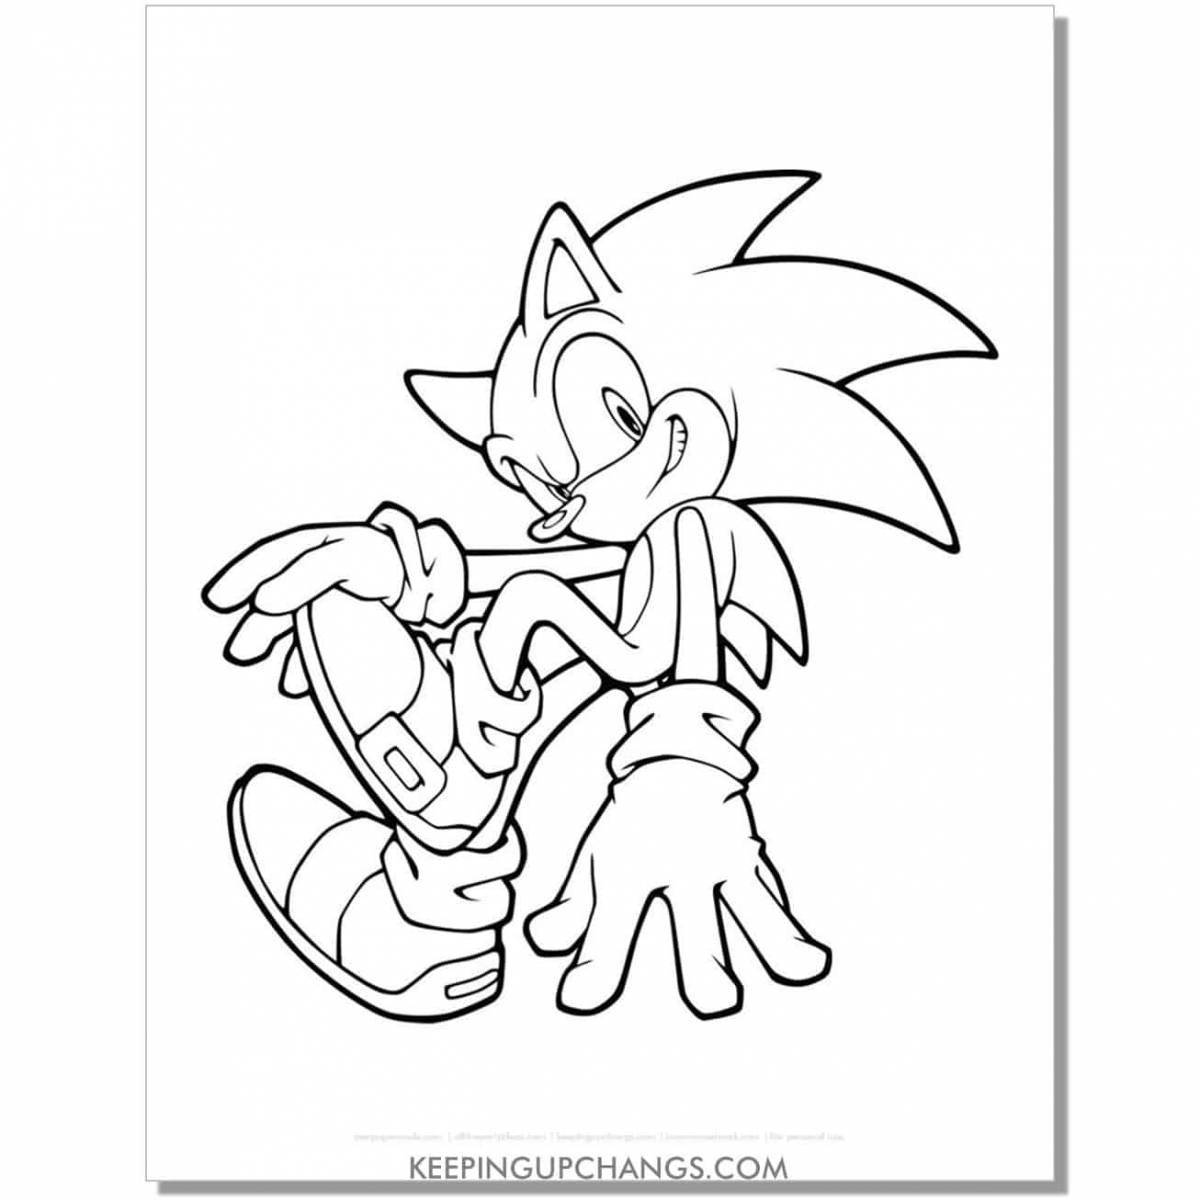 Hyper sonic glowing coloring page